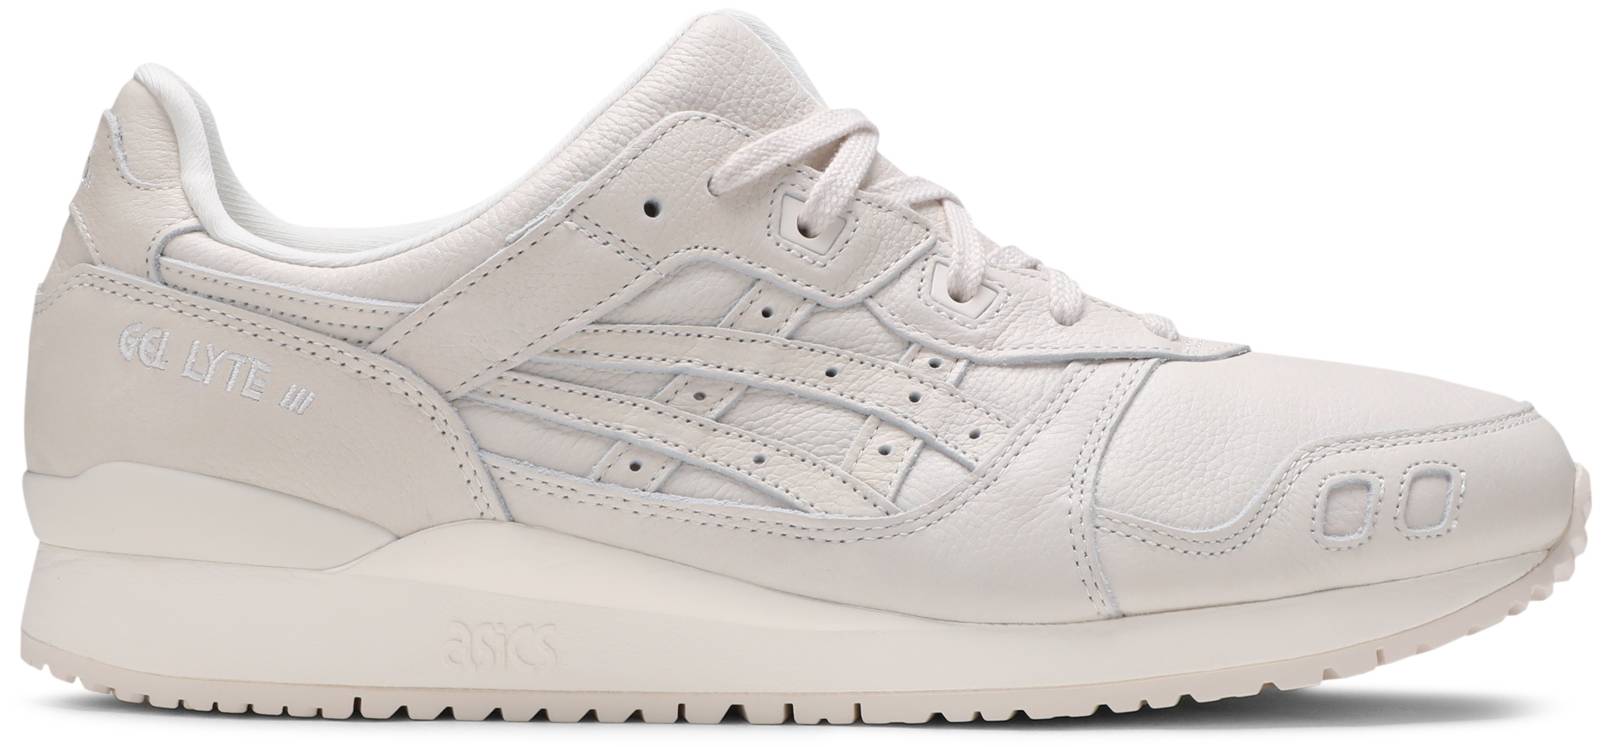 Reasonably Priced Sneakers From Nike, ASICS & Jordand Brand On GOAT